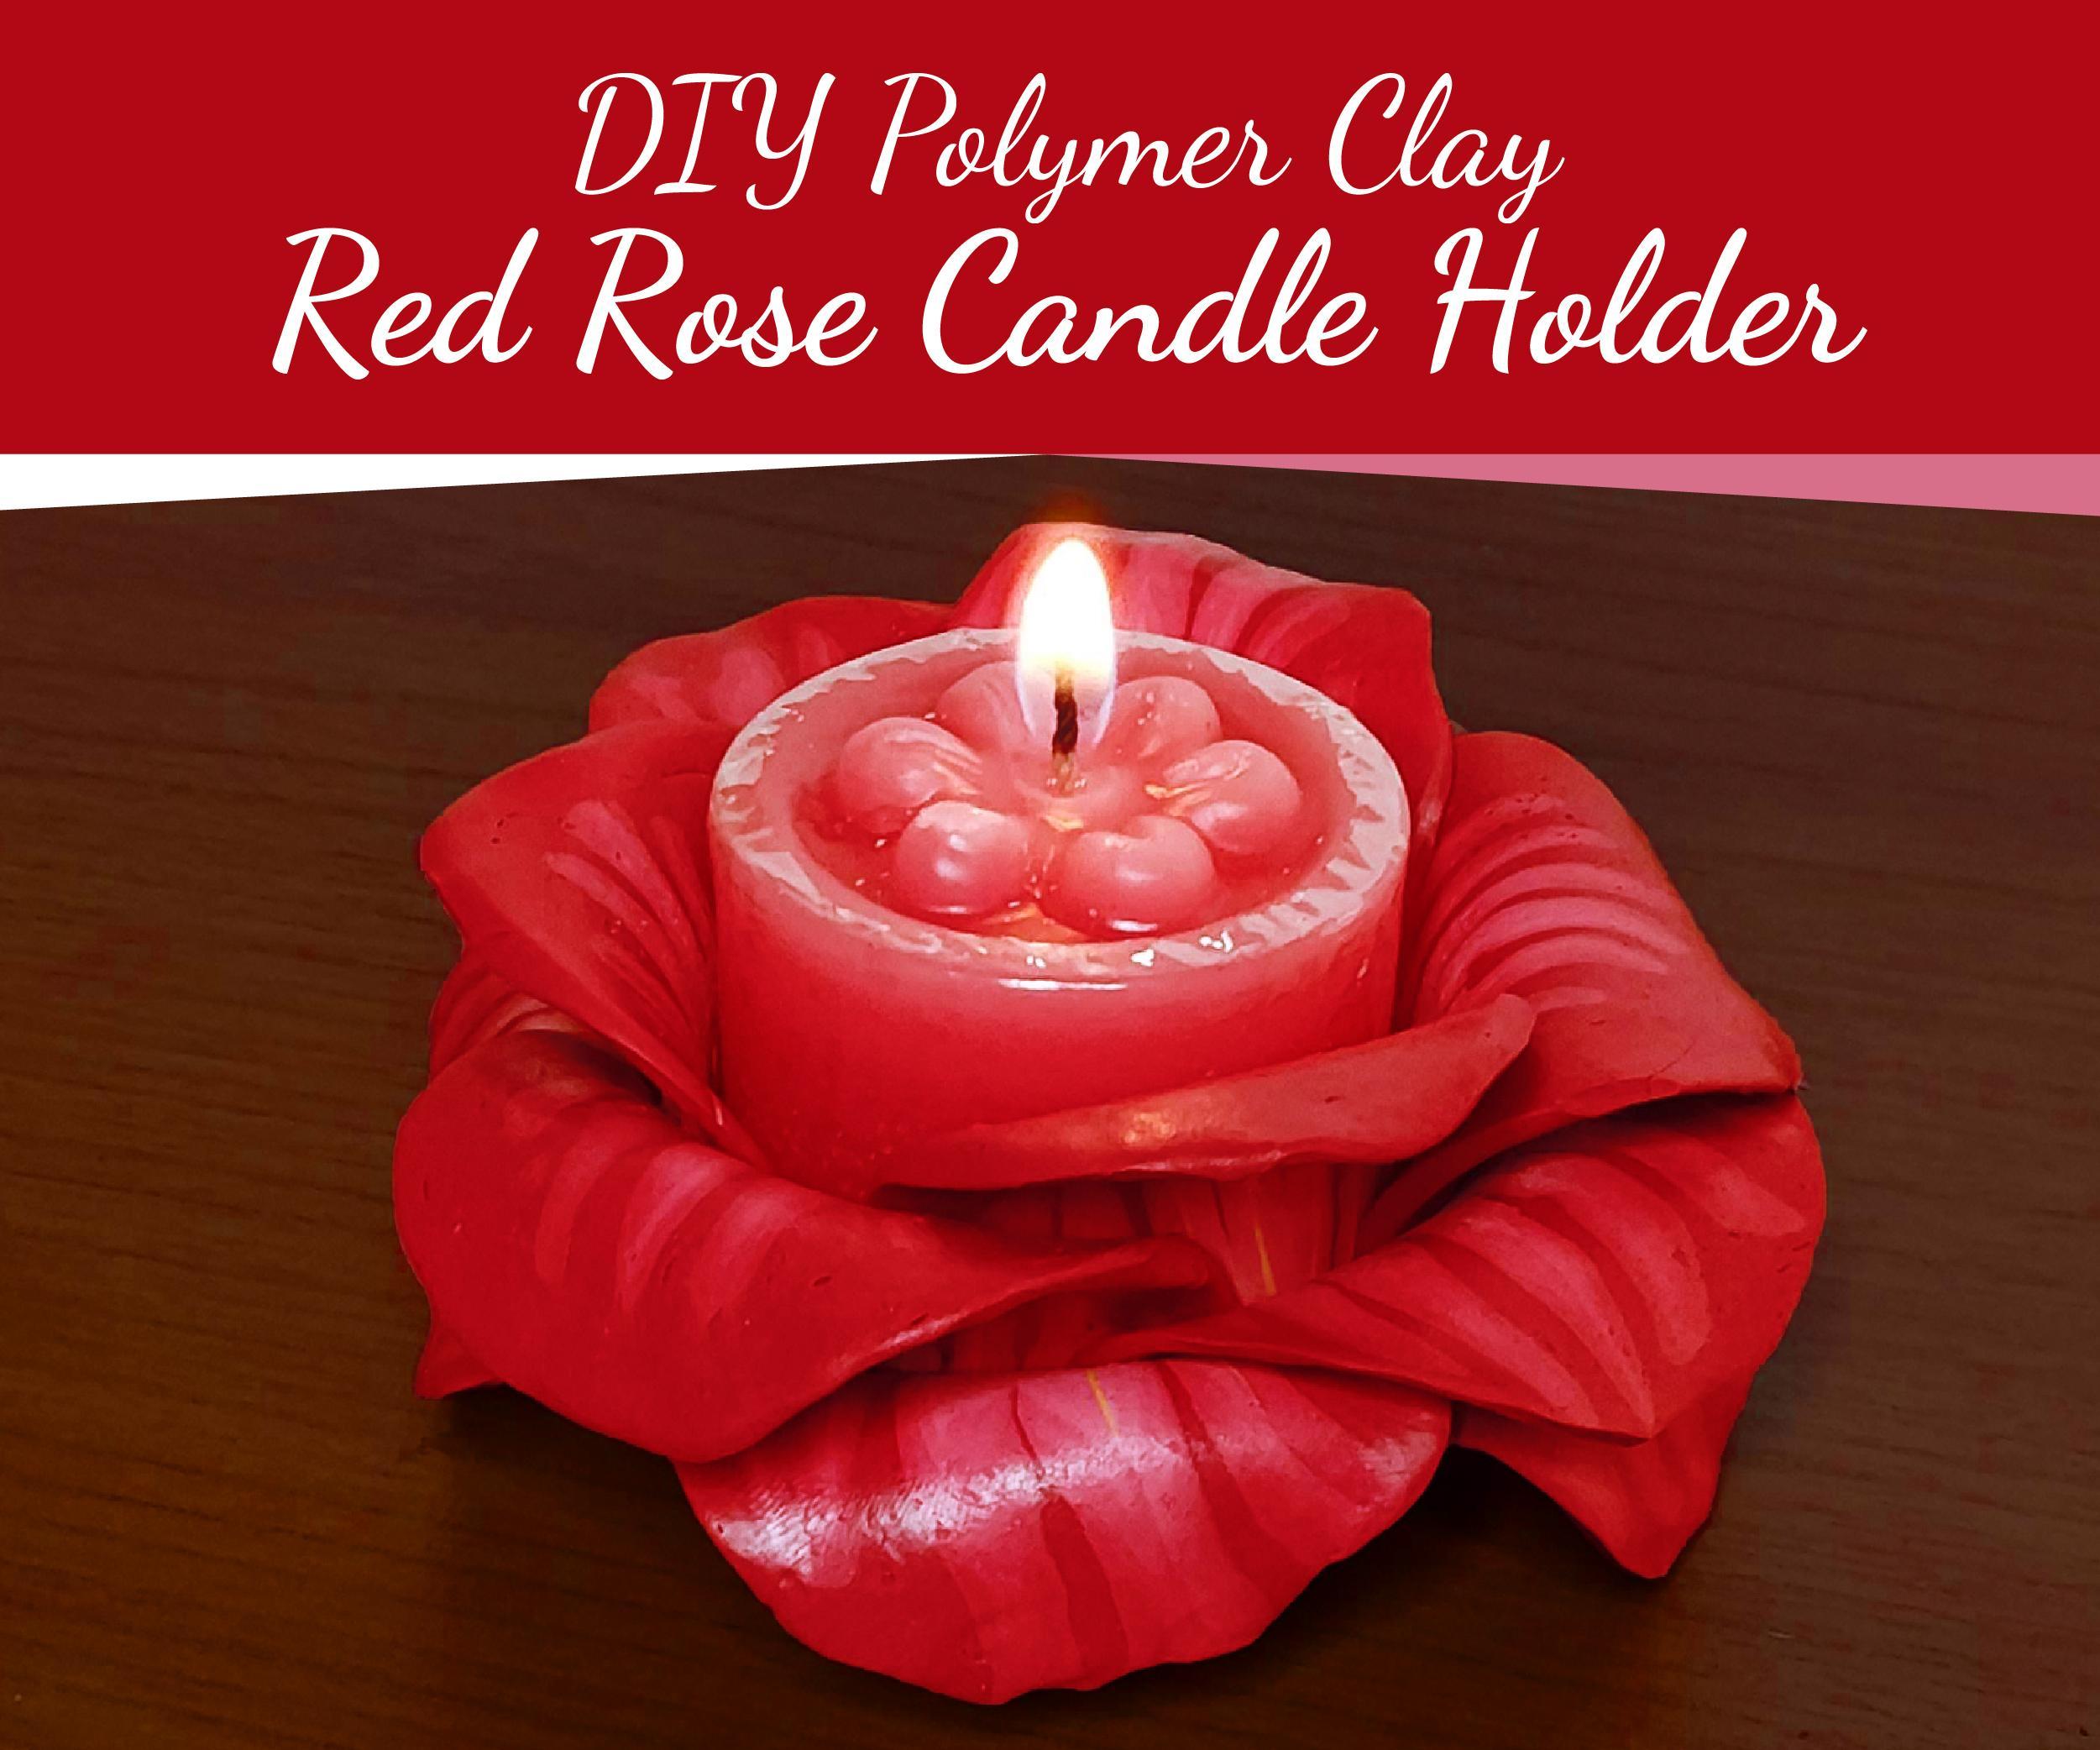 DIY Polymer Clay Red Rose Candle Holder  